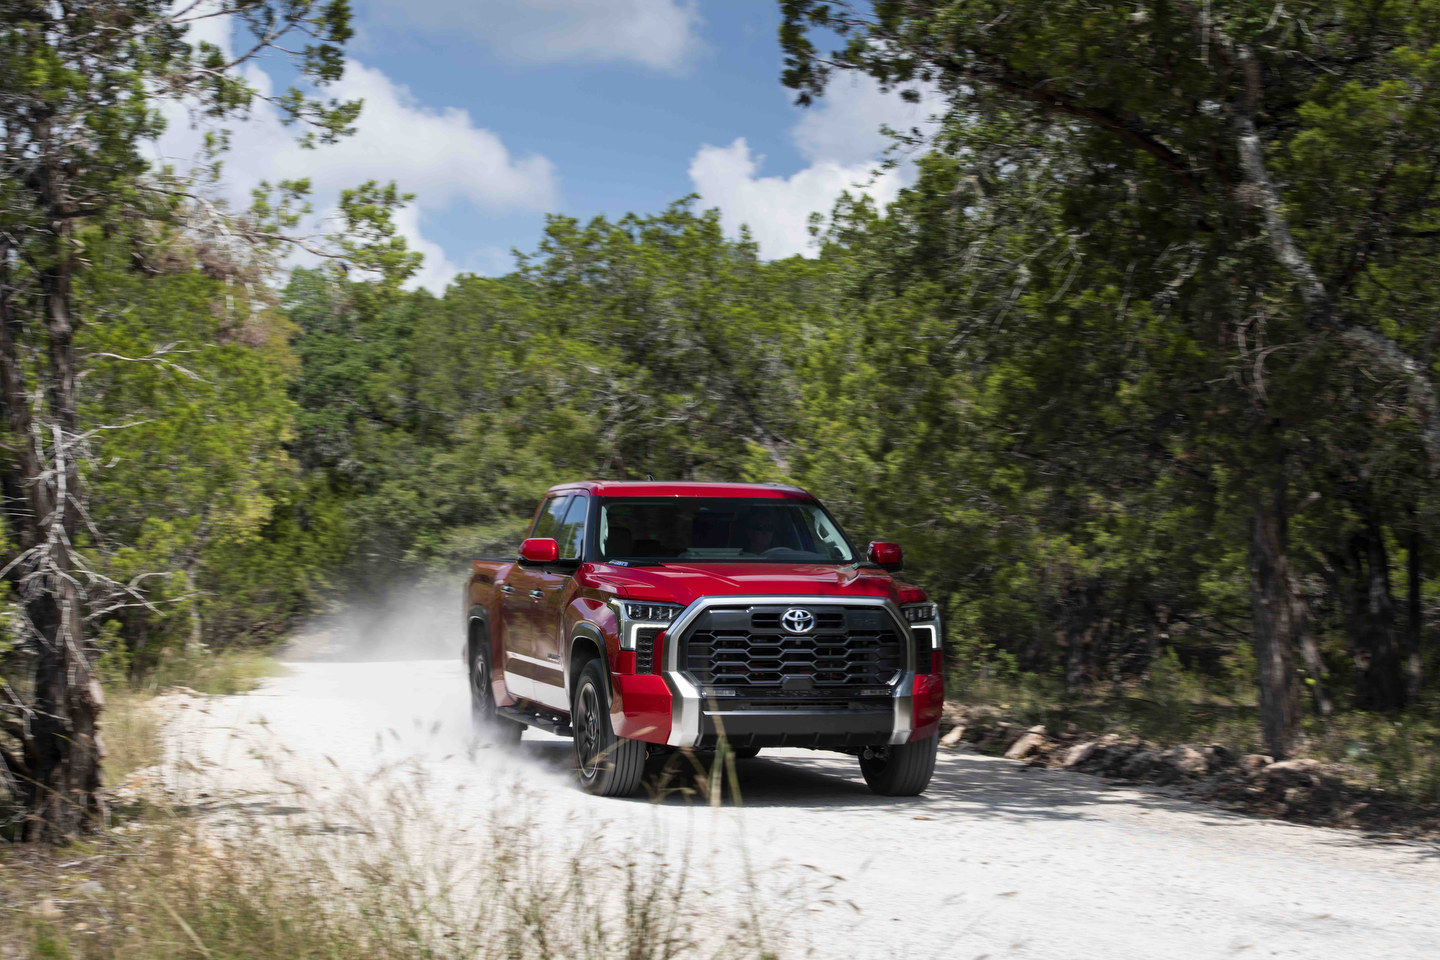 The 2022 Toyota Tundra will be offered starting at $44,990